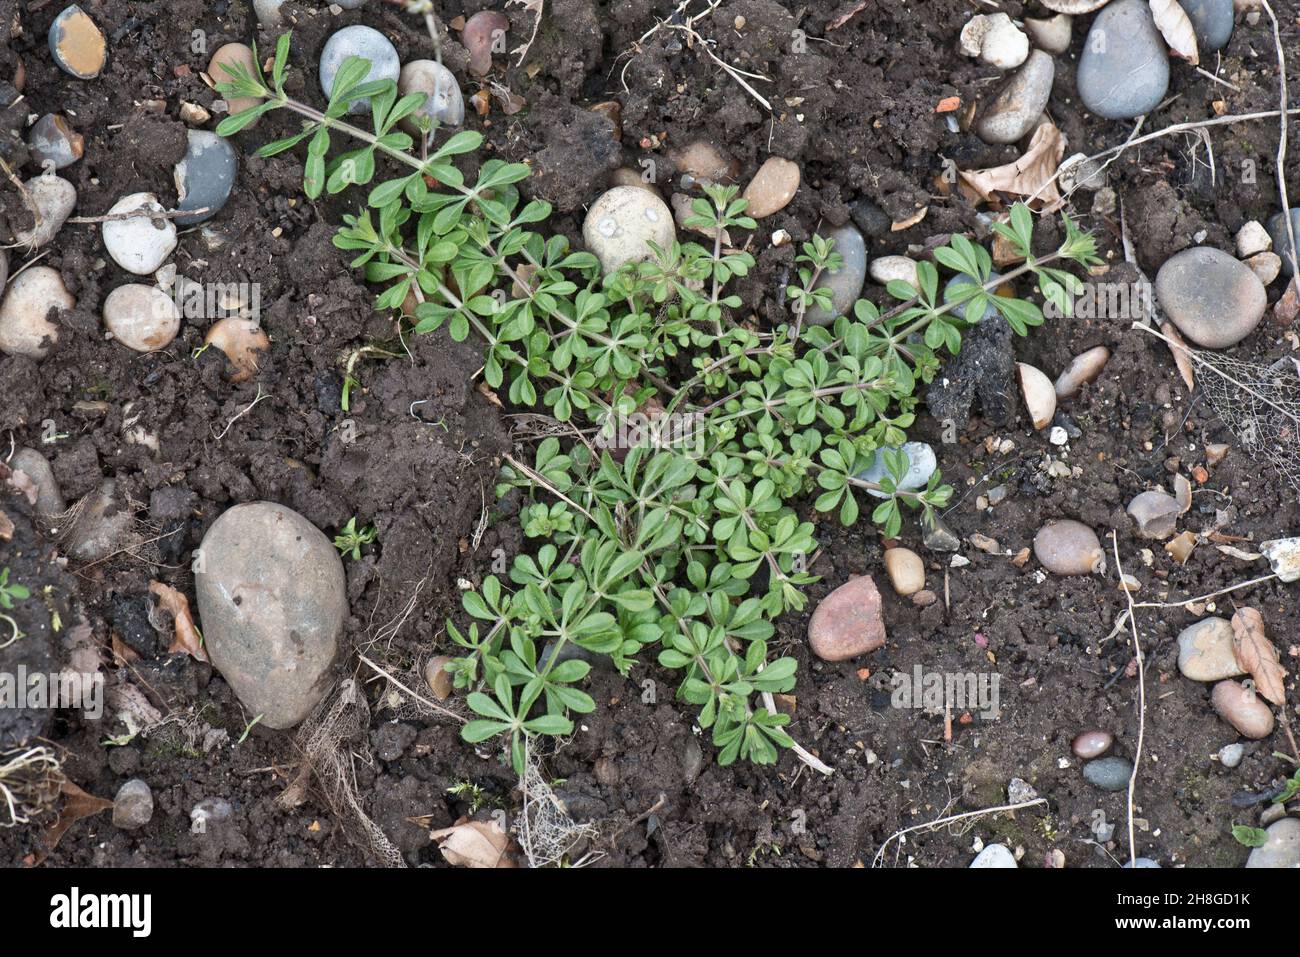 Cleavers (Galium aparine) prostrate plant on soil, importand arable and garden weed, Berkshire, March Stock Photo